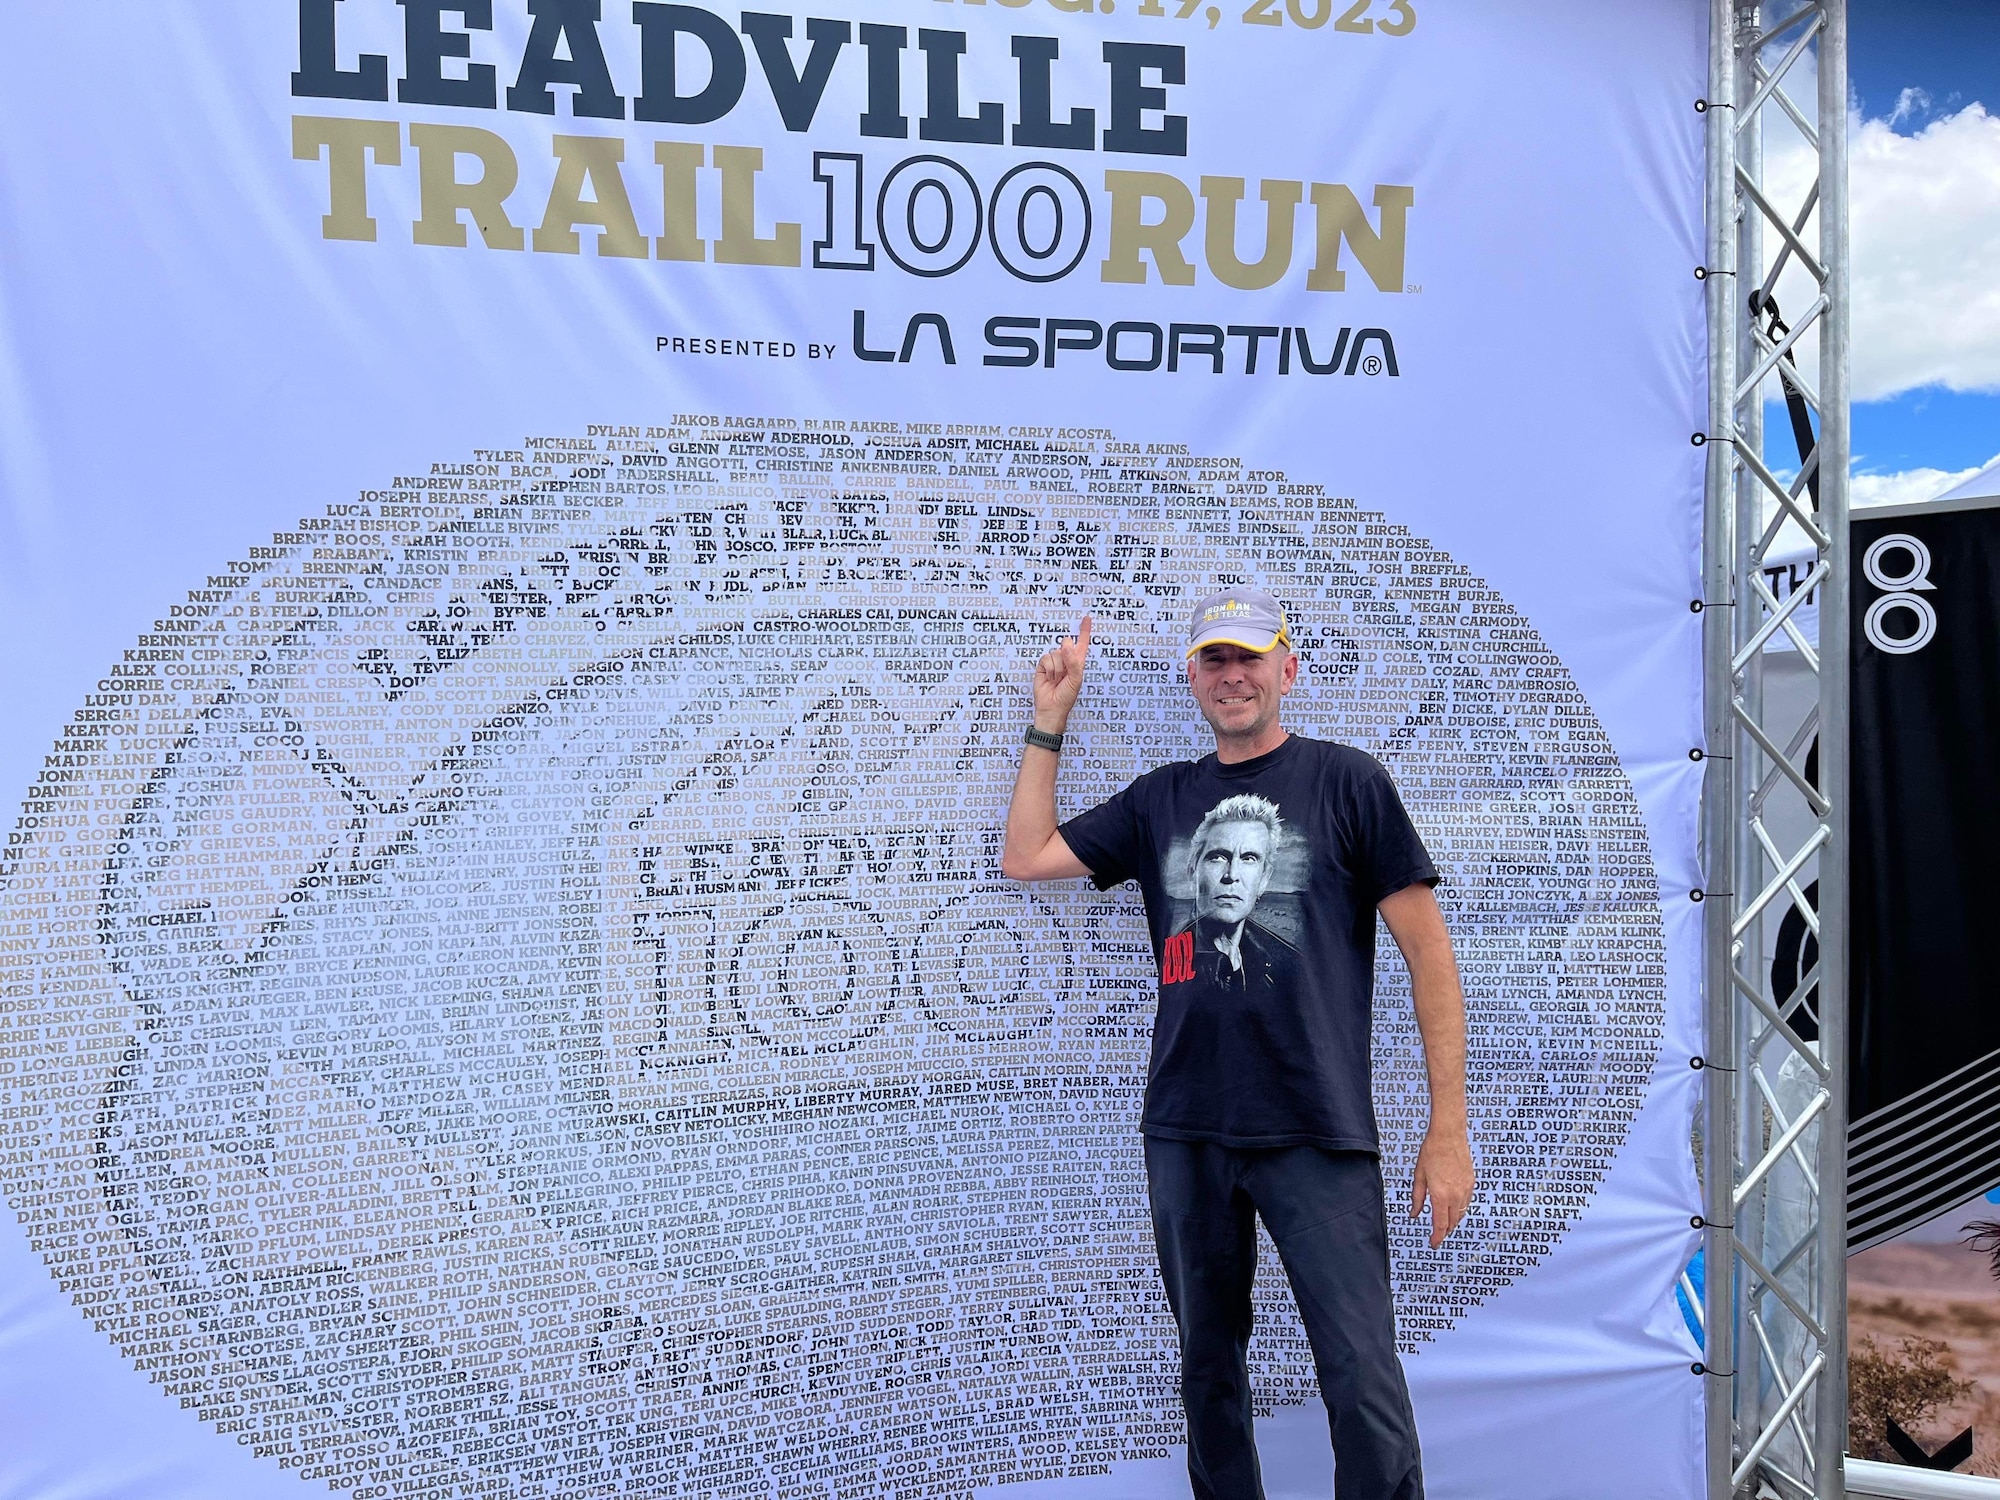 Patrick Buzzard, 4th Test and Evaluation Squadron security manager, poses for a photo in front of the Leadville Trail 100 Run sign near Leadville, Colorado, Aug. 18, 2023. The Leadville Trail 100 Run is an ultramarathon held annually on rugged trails and dirt roads through the heart of the Rocky Mountains. The course is a 50-mile out-and-back dogleg run primarily on the Colorado Trail, starting at 10,200 feet. The centerpiece of the course is the climb up to Hope Pass at 12,620 feet, encountered on both the outbound trek and on the return. Buzzard finished the 100-mile course in 29 hours, 48 minutes, and 57 seconds, just beating the 30-hour time limit. (Courtesy photo)